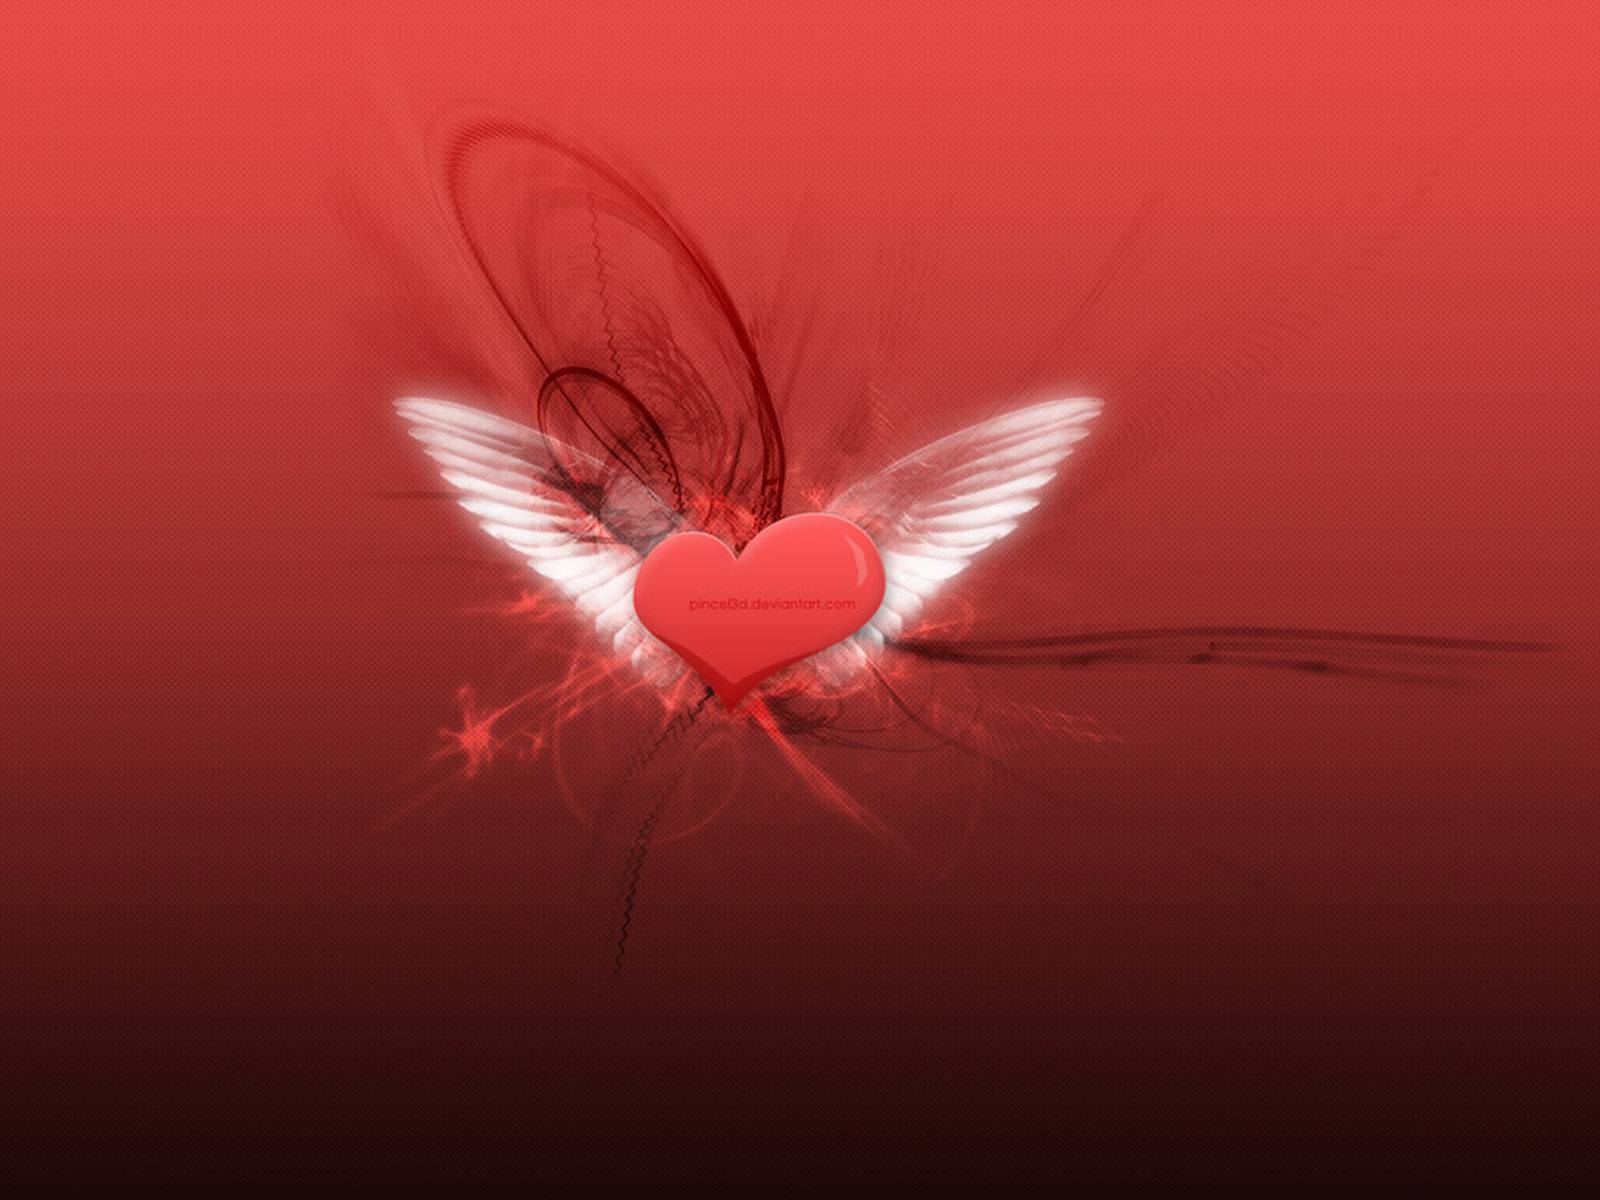 Love Heart With Wings Wallpaper Galleryhip The